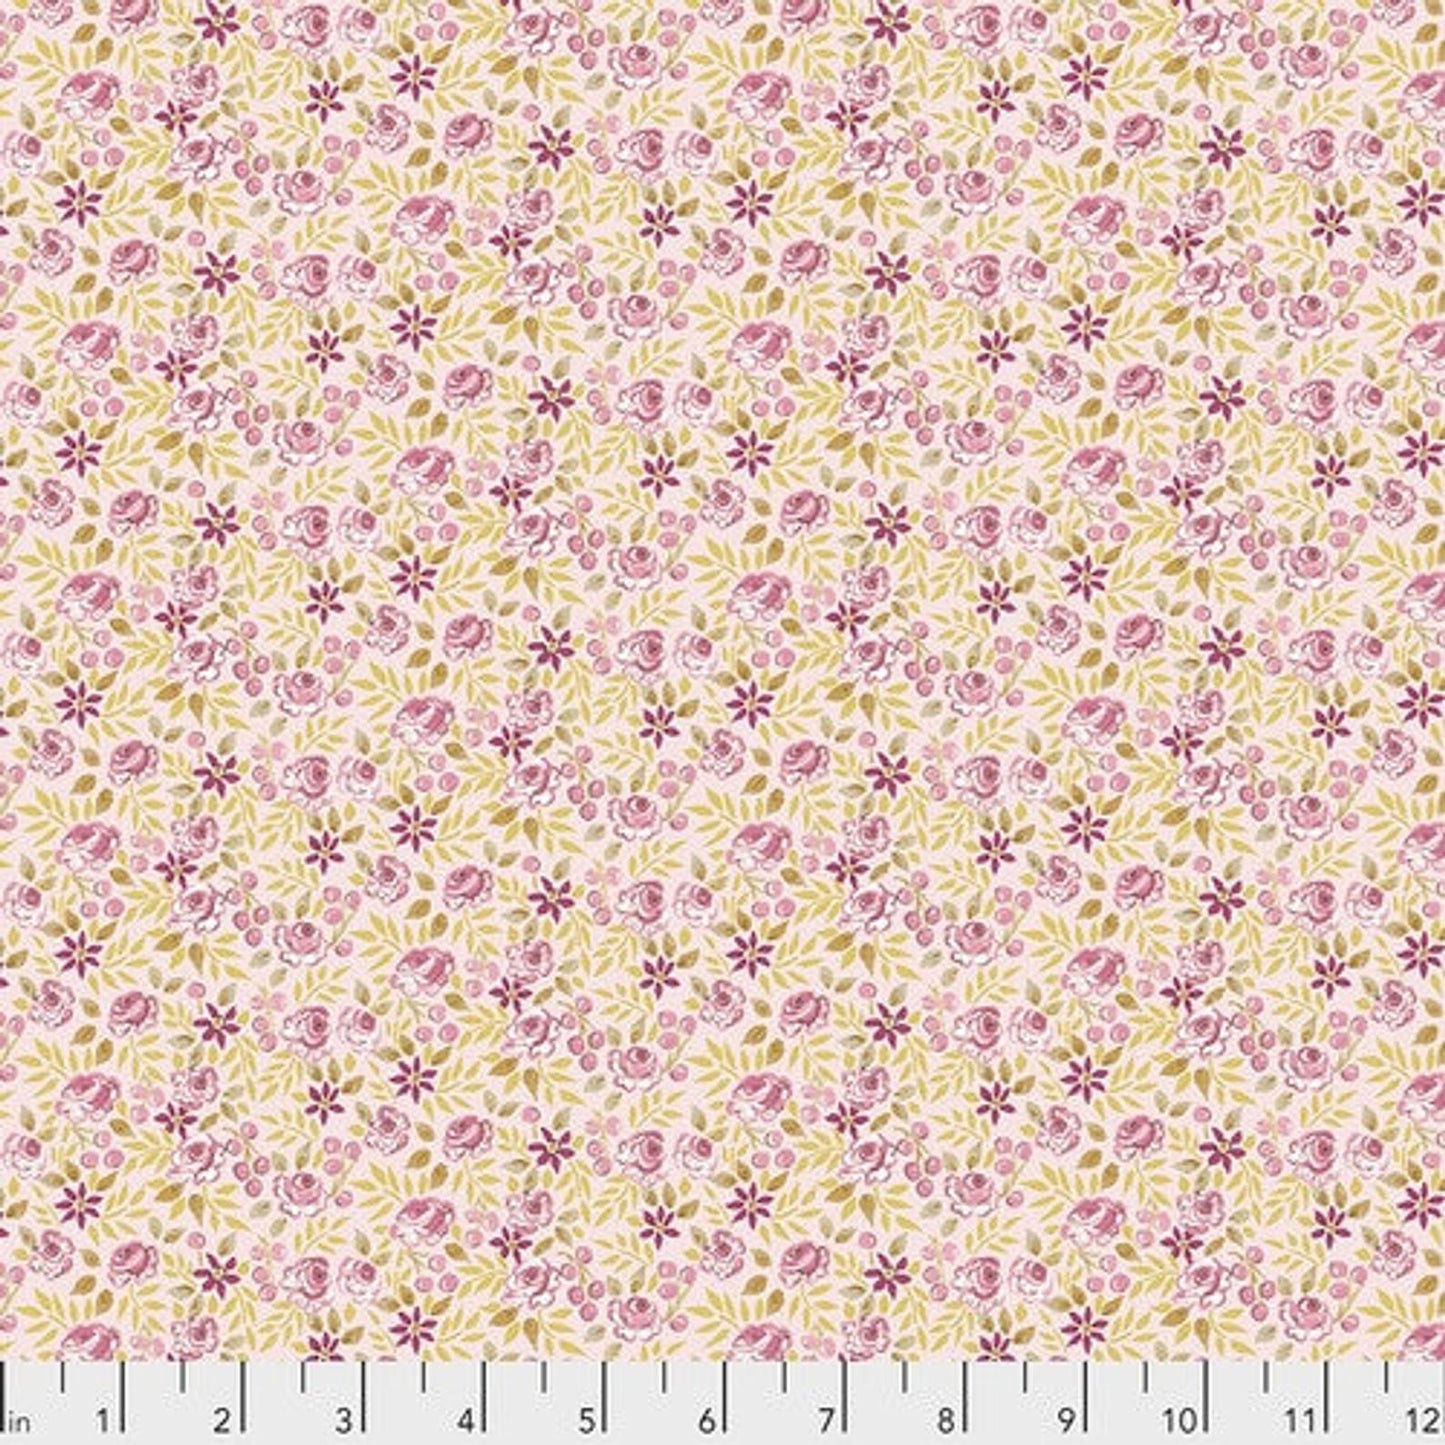 CANBERRA ROSE OCHRE - from Adelaide Grove by Dena Designs - by Free Spirit Fabrics- 100% Cotton, Toad Hollow Fabrics